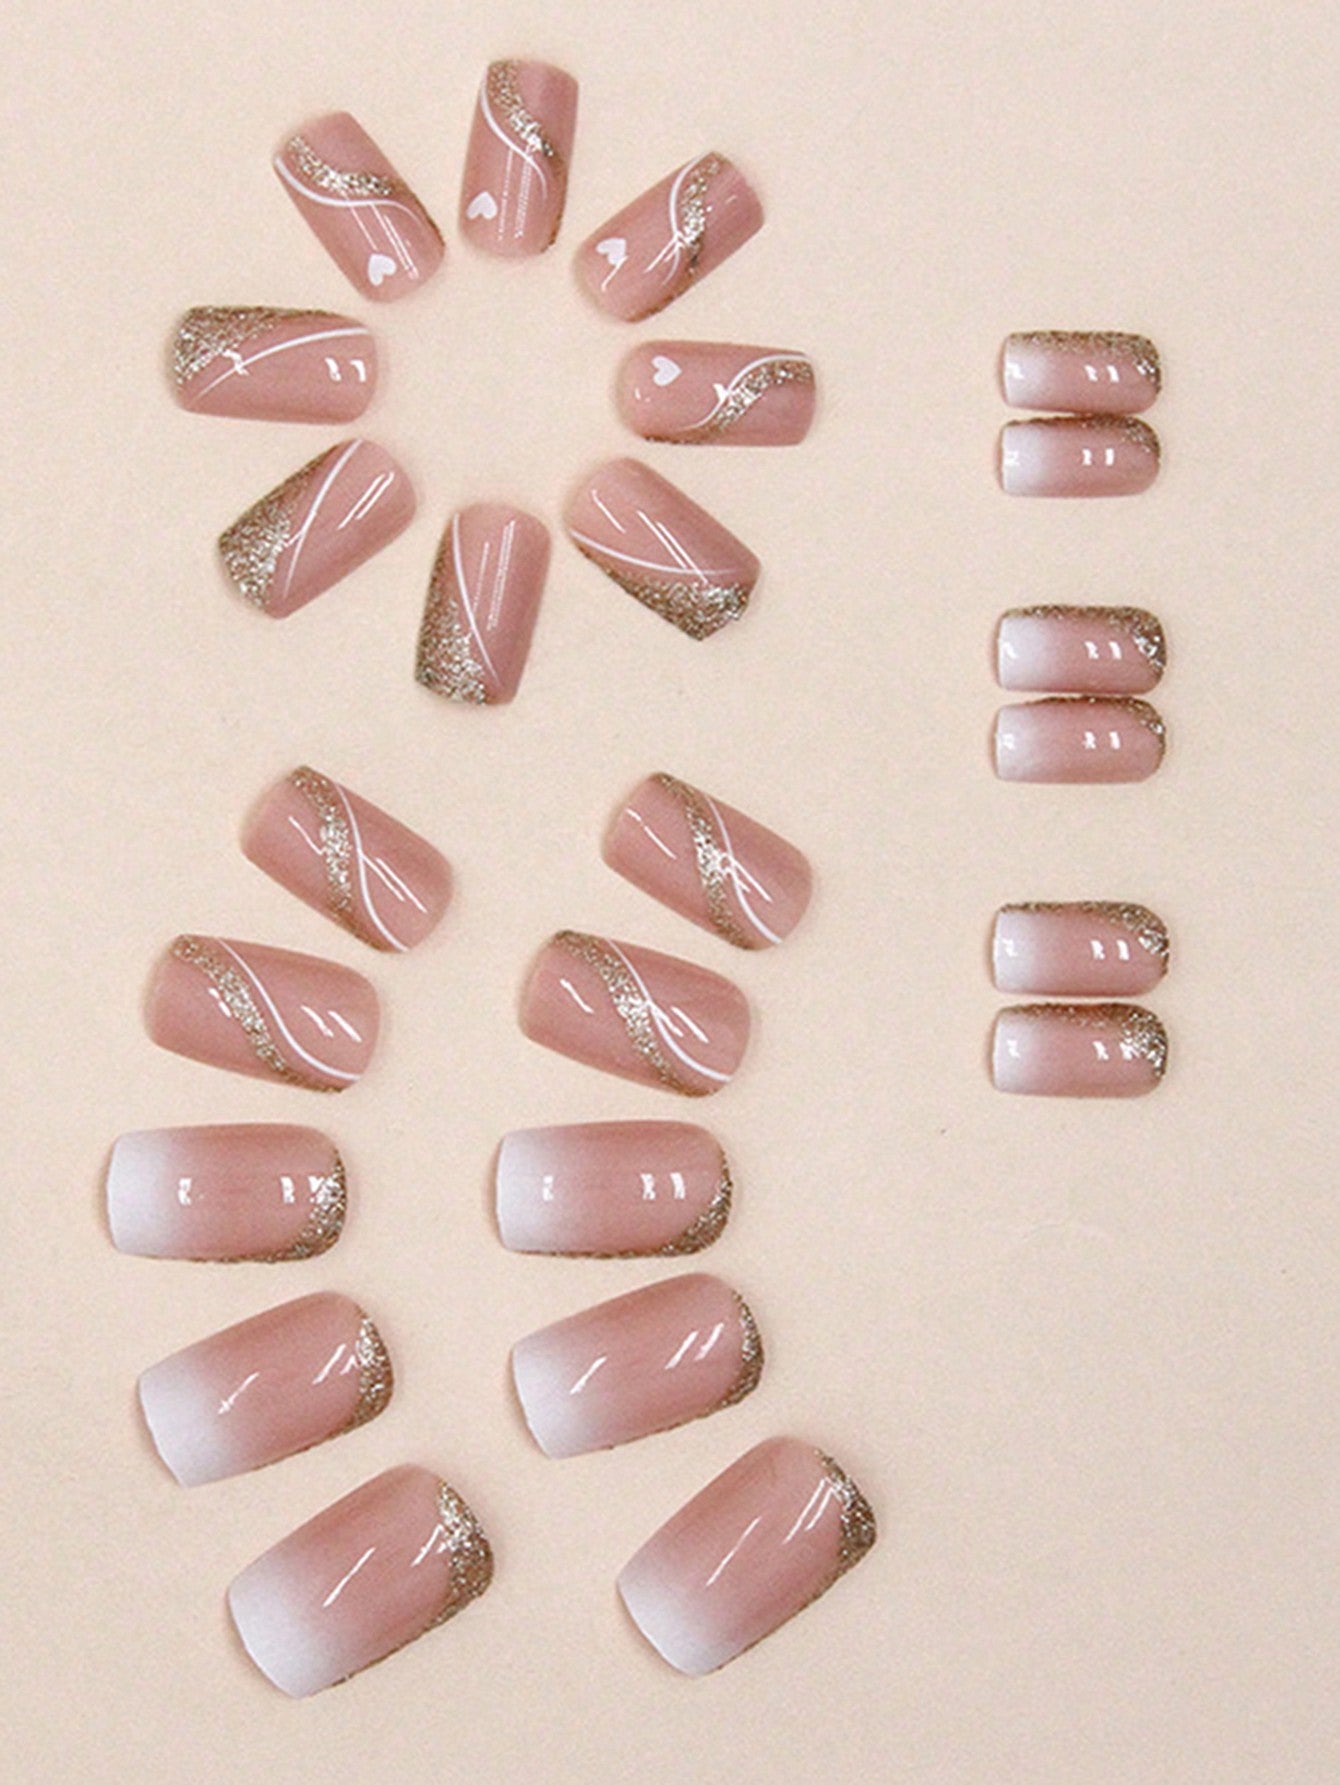 24 pc Set Medium-long Square Shaped, European American Gradient Glitter Style Nails, Love Hearts Nail Art with Stickers, 1 File and Jelly Gel 🔥